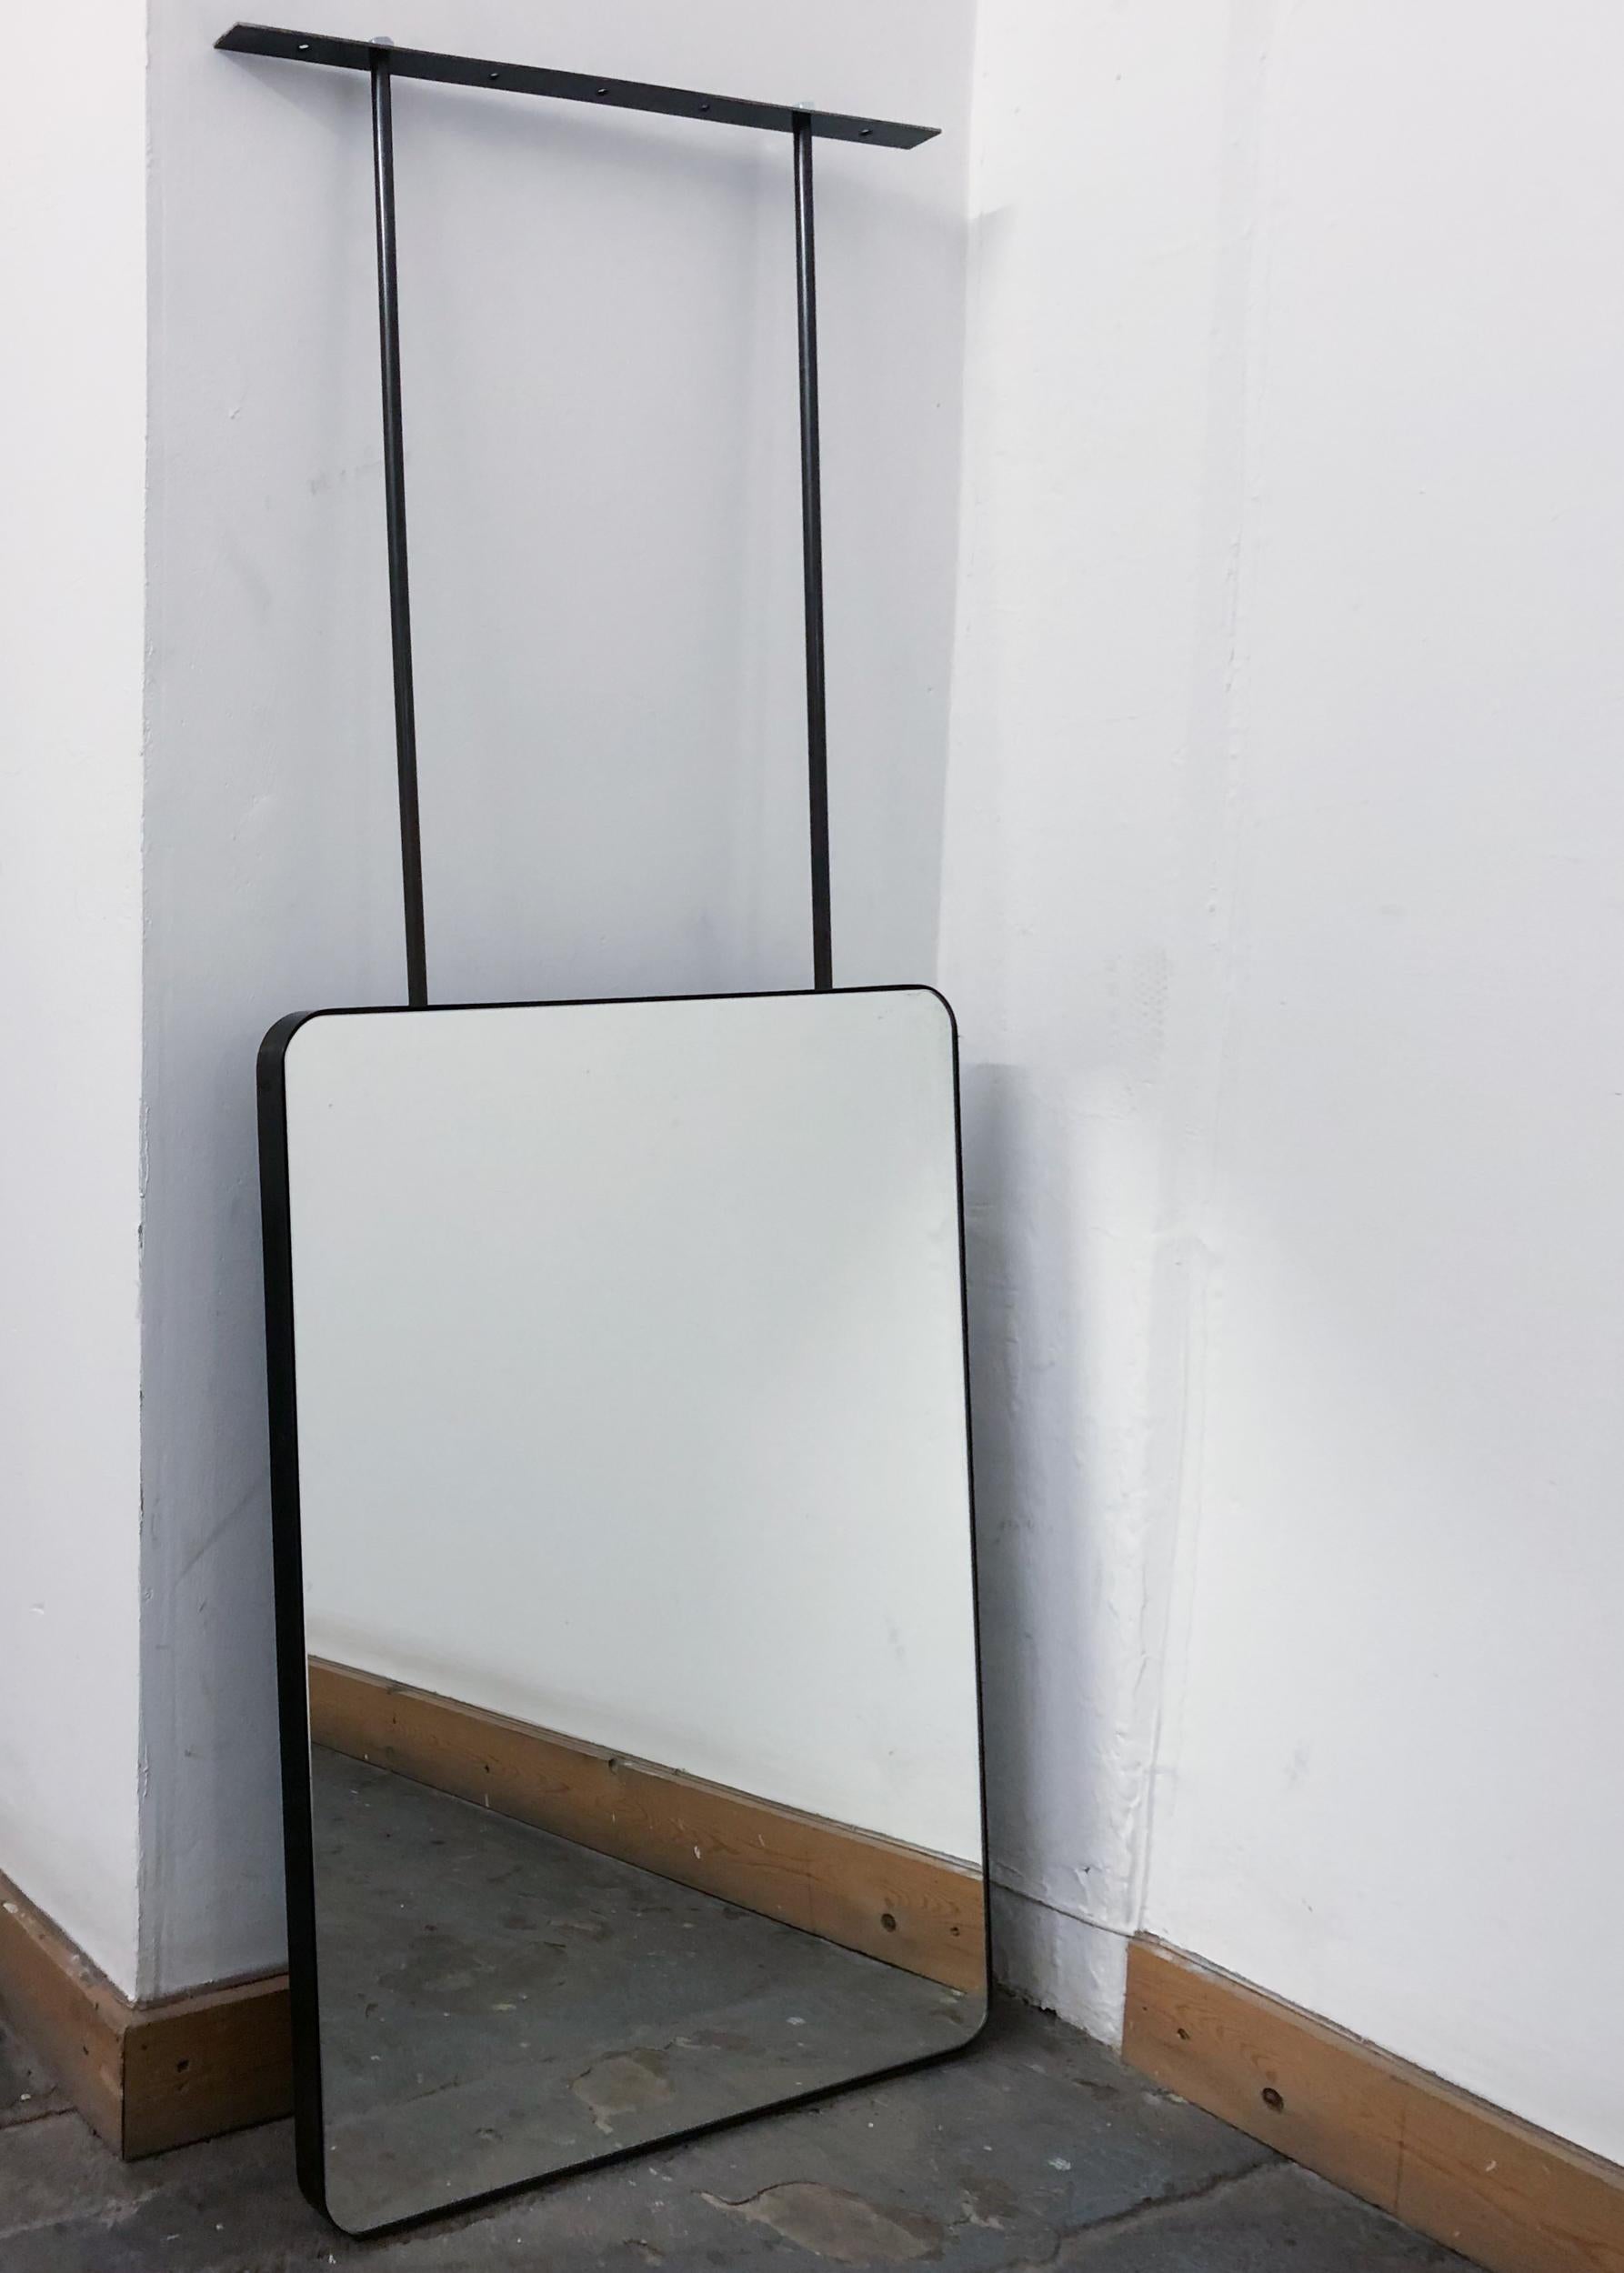 Stunning ceiling suspended rectangular mirror with rounded corners. The blackened stainless steel frame creates a modern, metallic, industrial look.

Mirror dimensions: 609mm (24